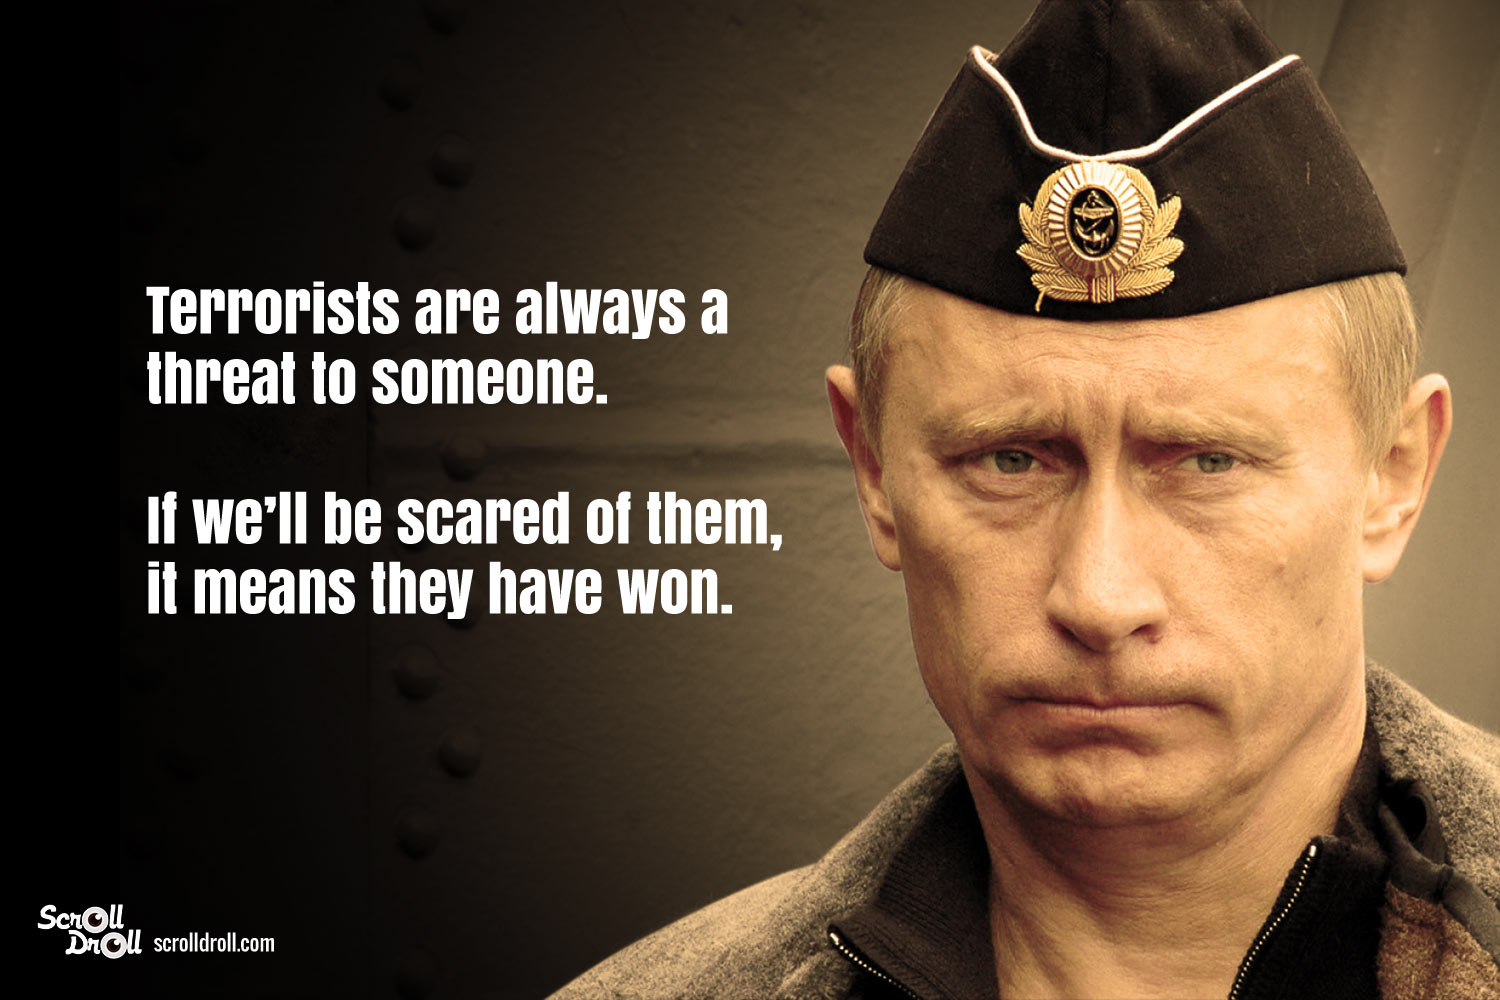 10 Powerful Quotes by Vladimir Putin - The President Of Russia